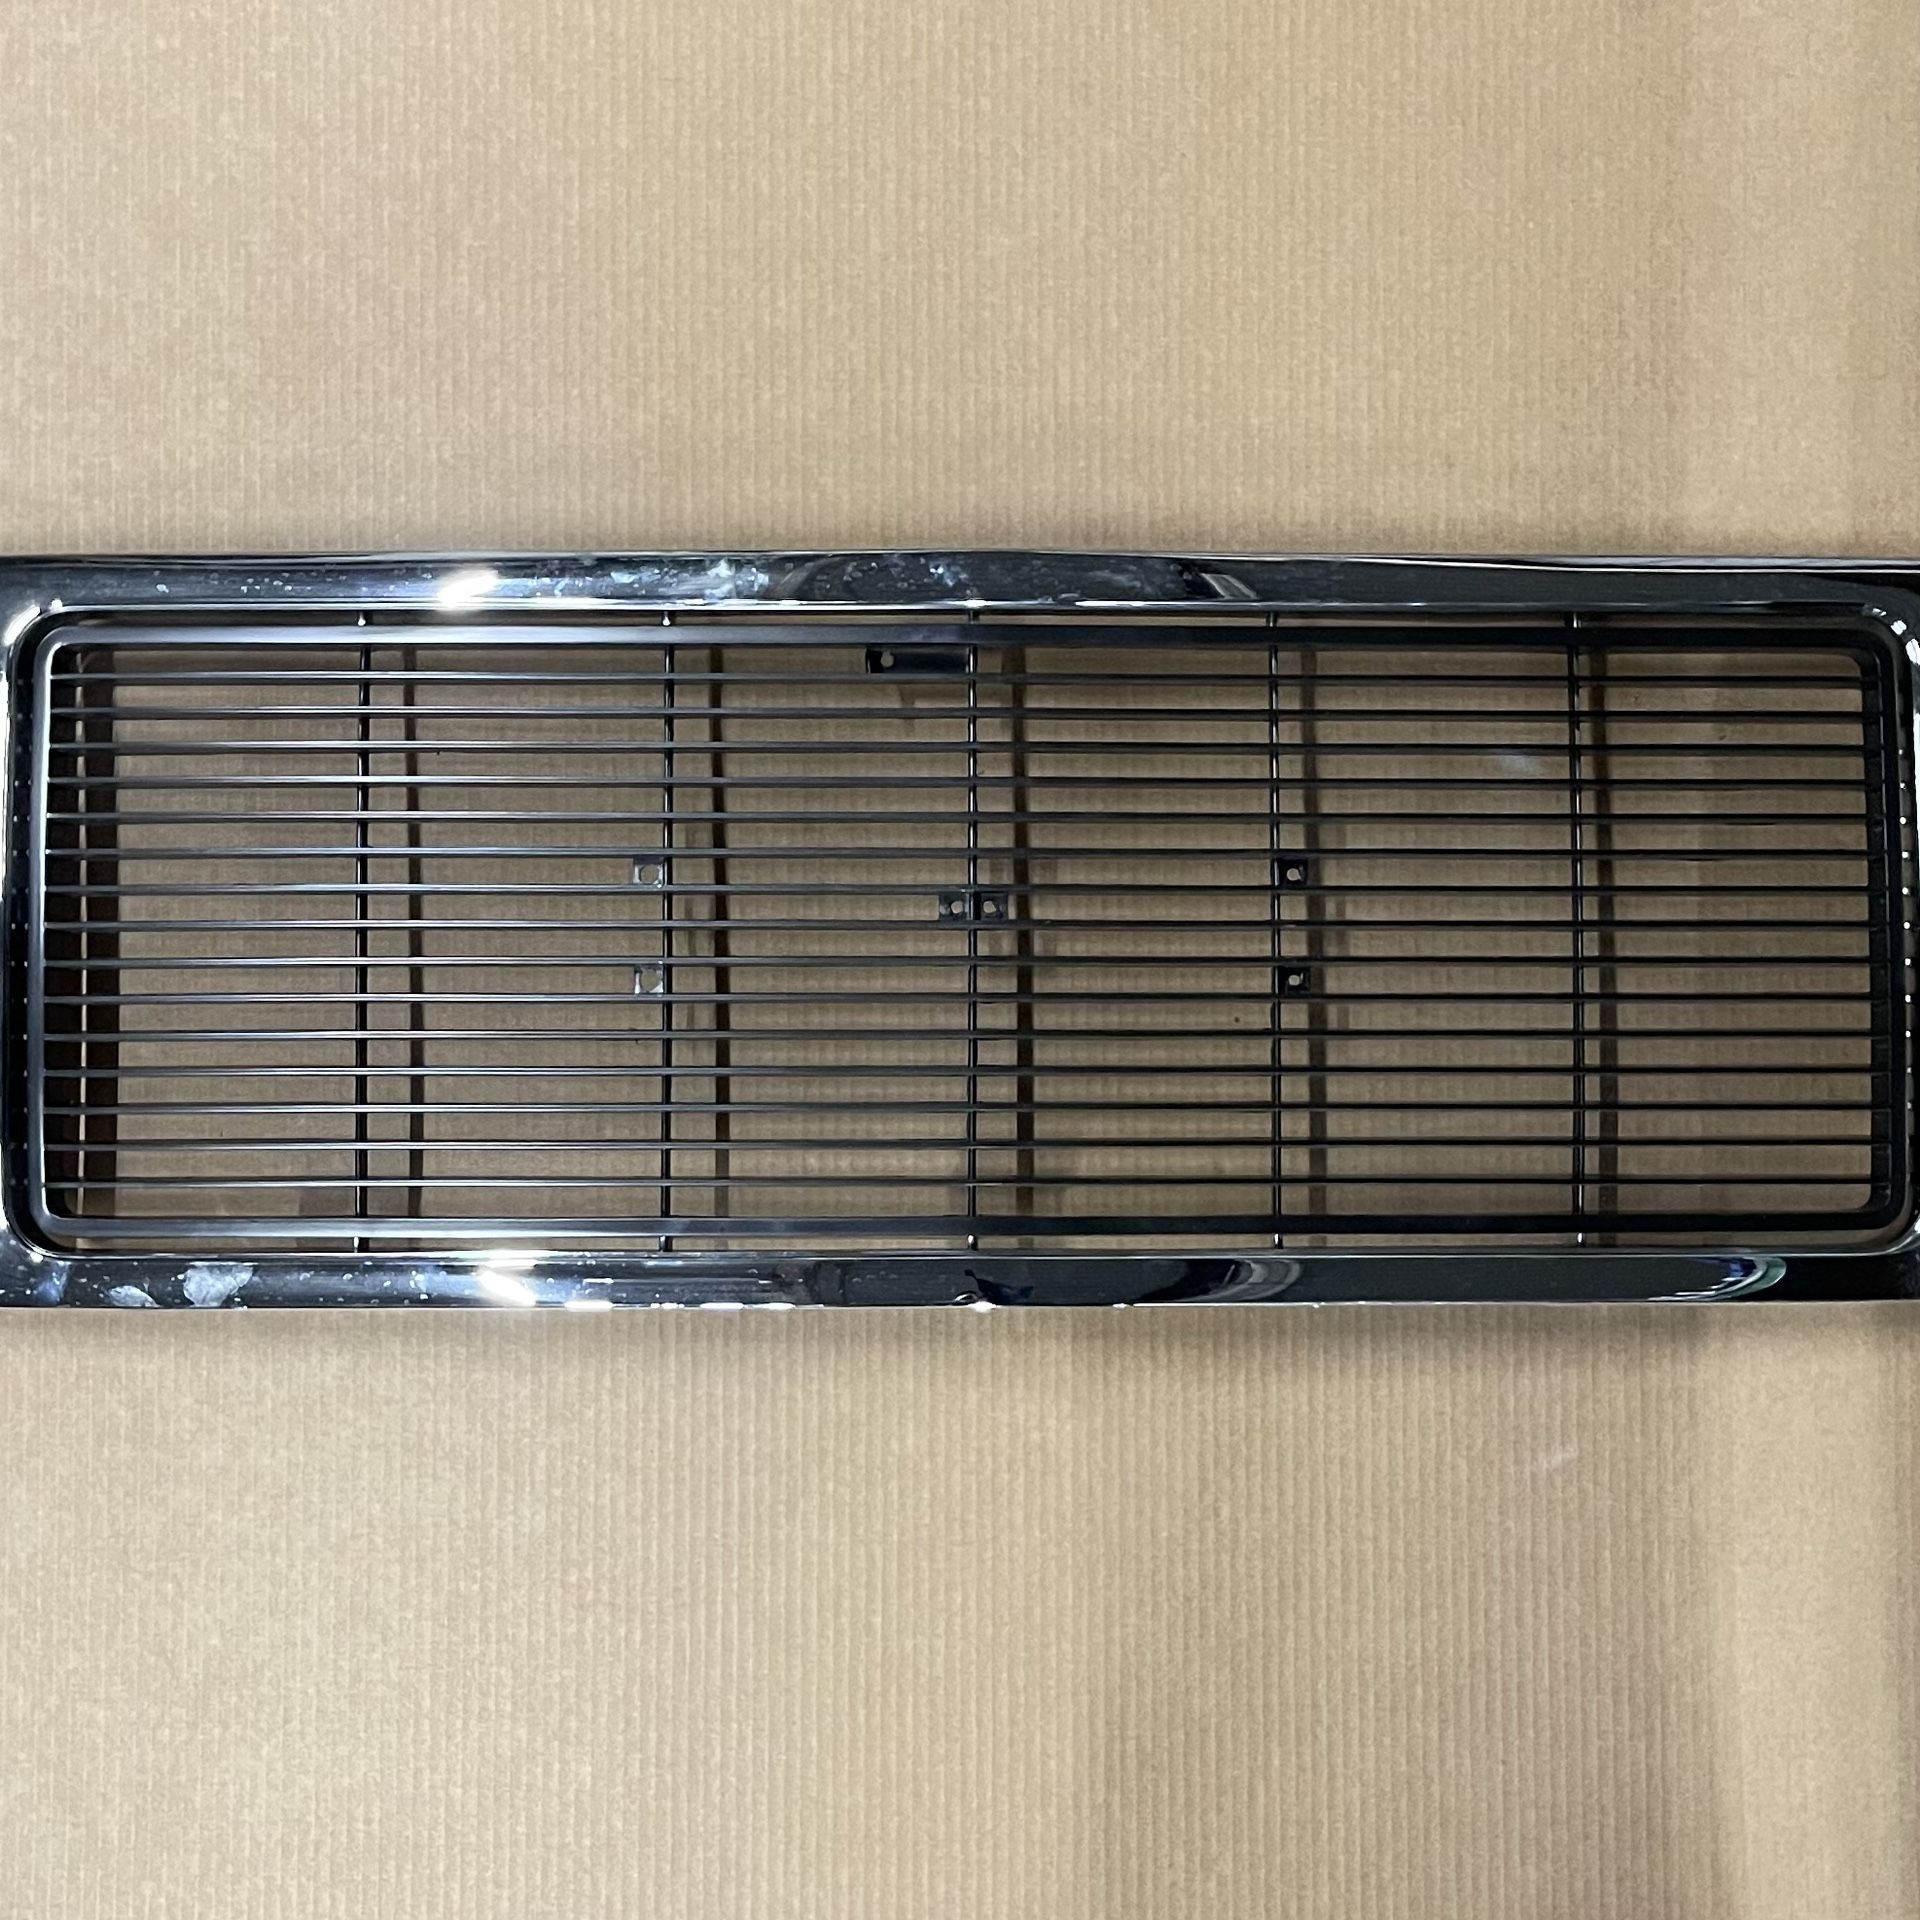 Chrome Grille for 89-91 GMC Jimmy, Pickup, Suburban